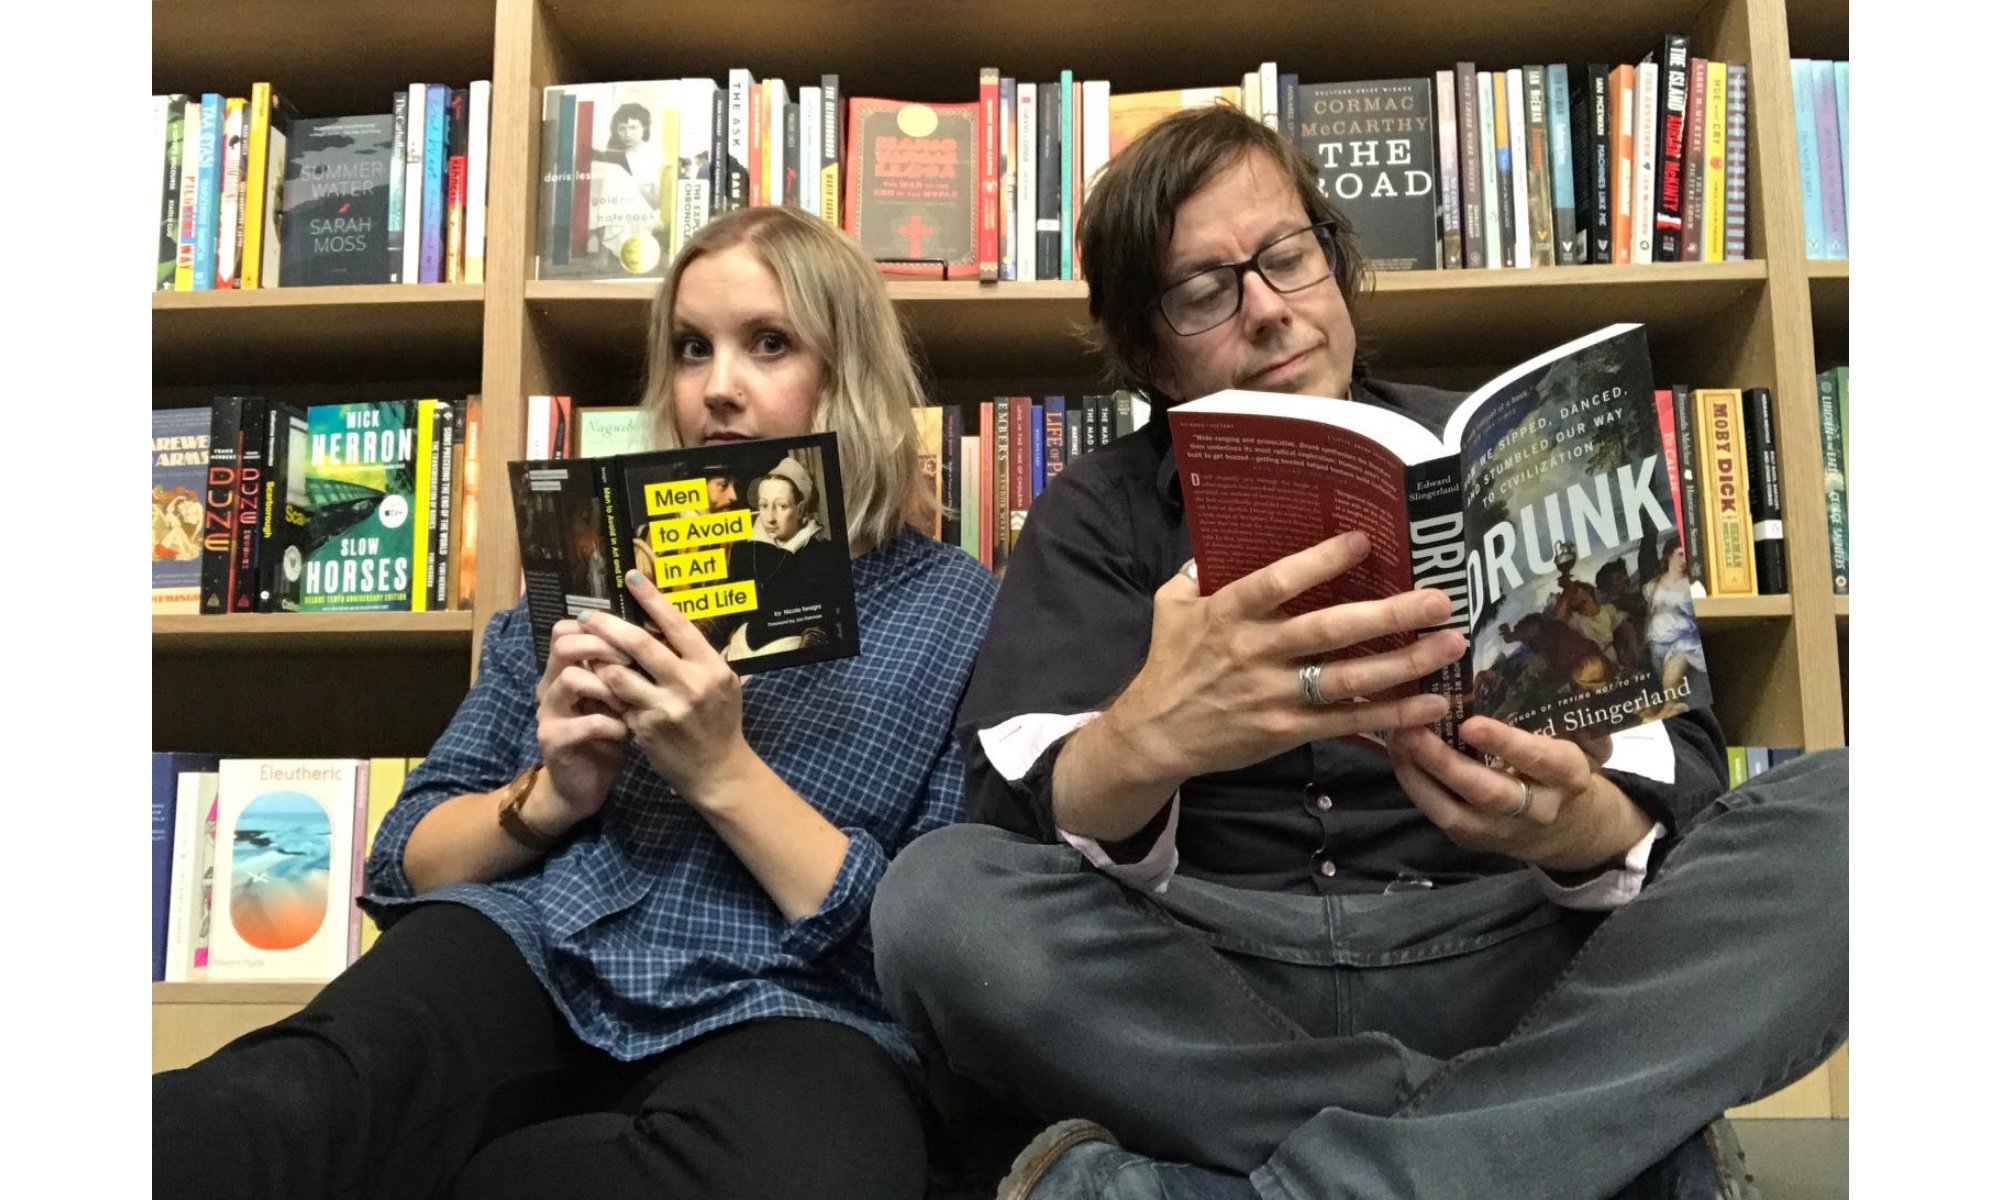 A man and a woman sit in front of a bookshelf. She is reading a book called "Men to Avoid in Life and Art" and he is reading a book called "Drunk."